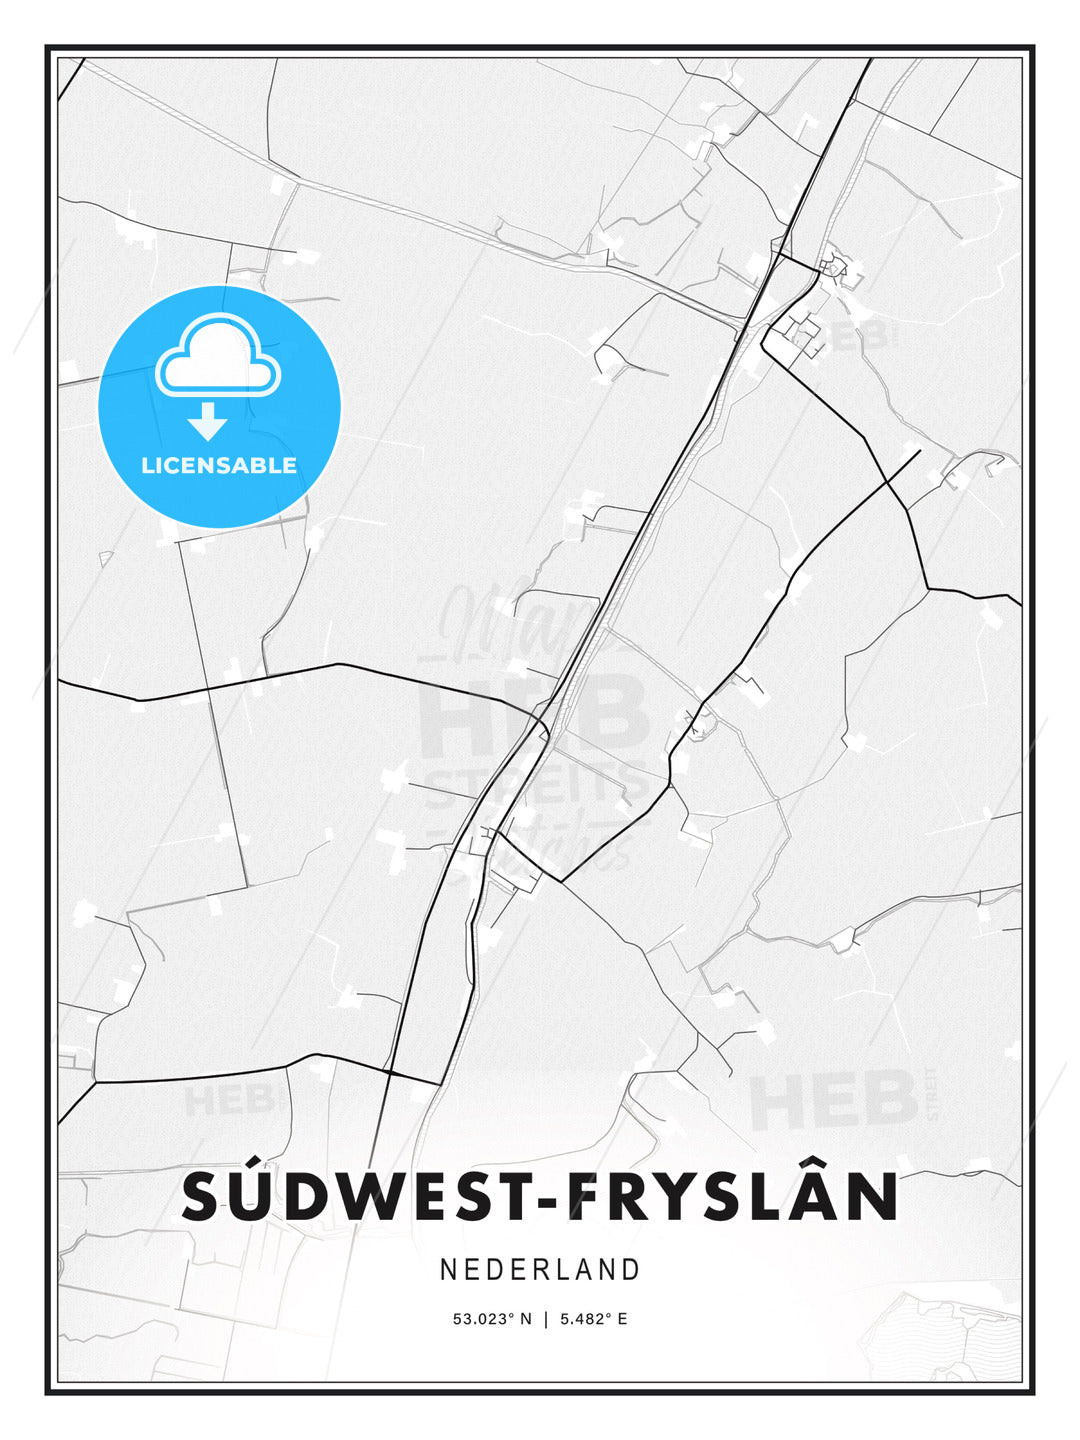 Súdwest-Fryslân, Netherlands, Modern Print Template in Various Formats - HEBSTREITS Sketches